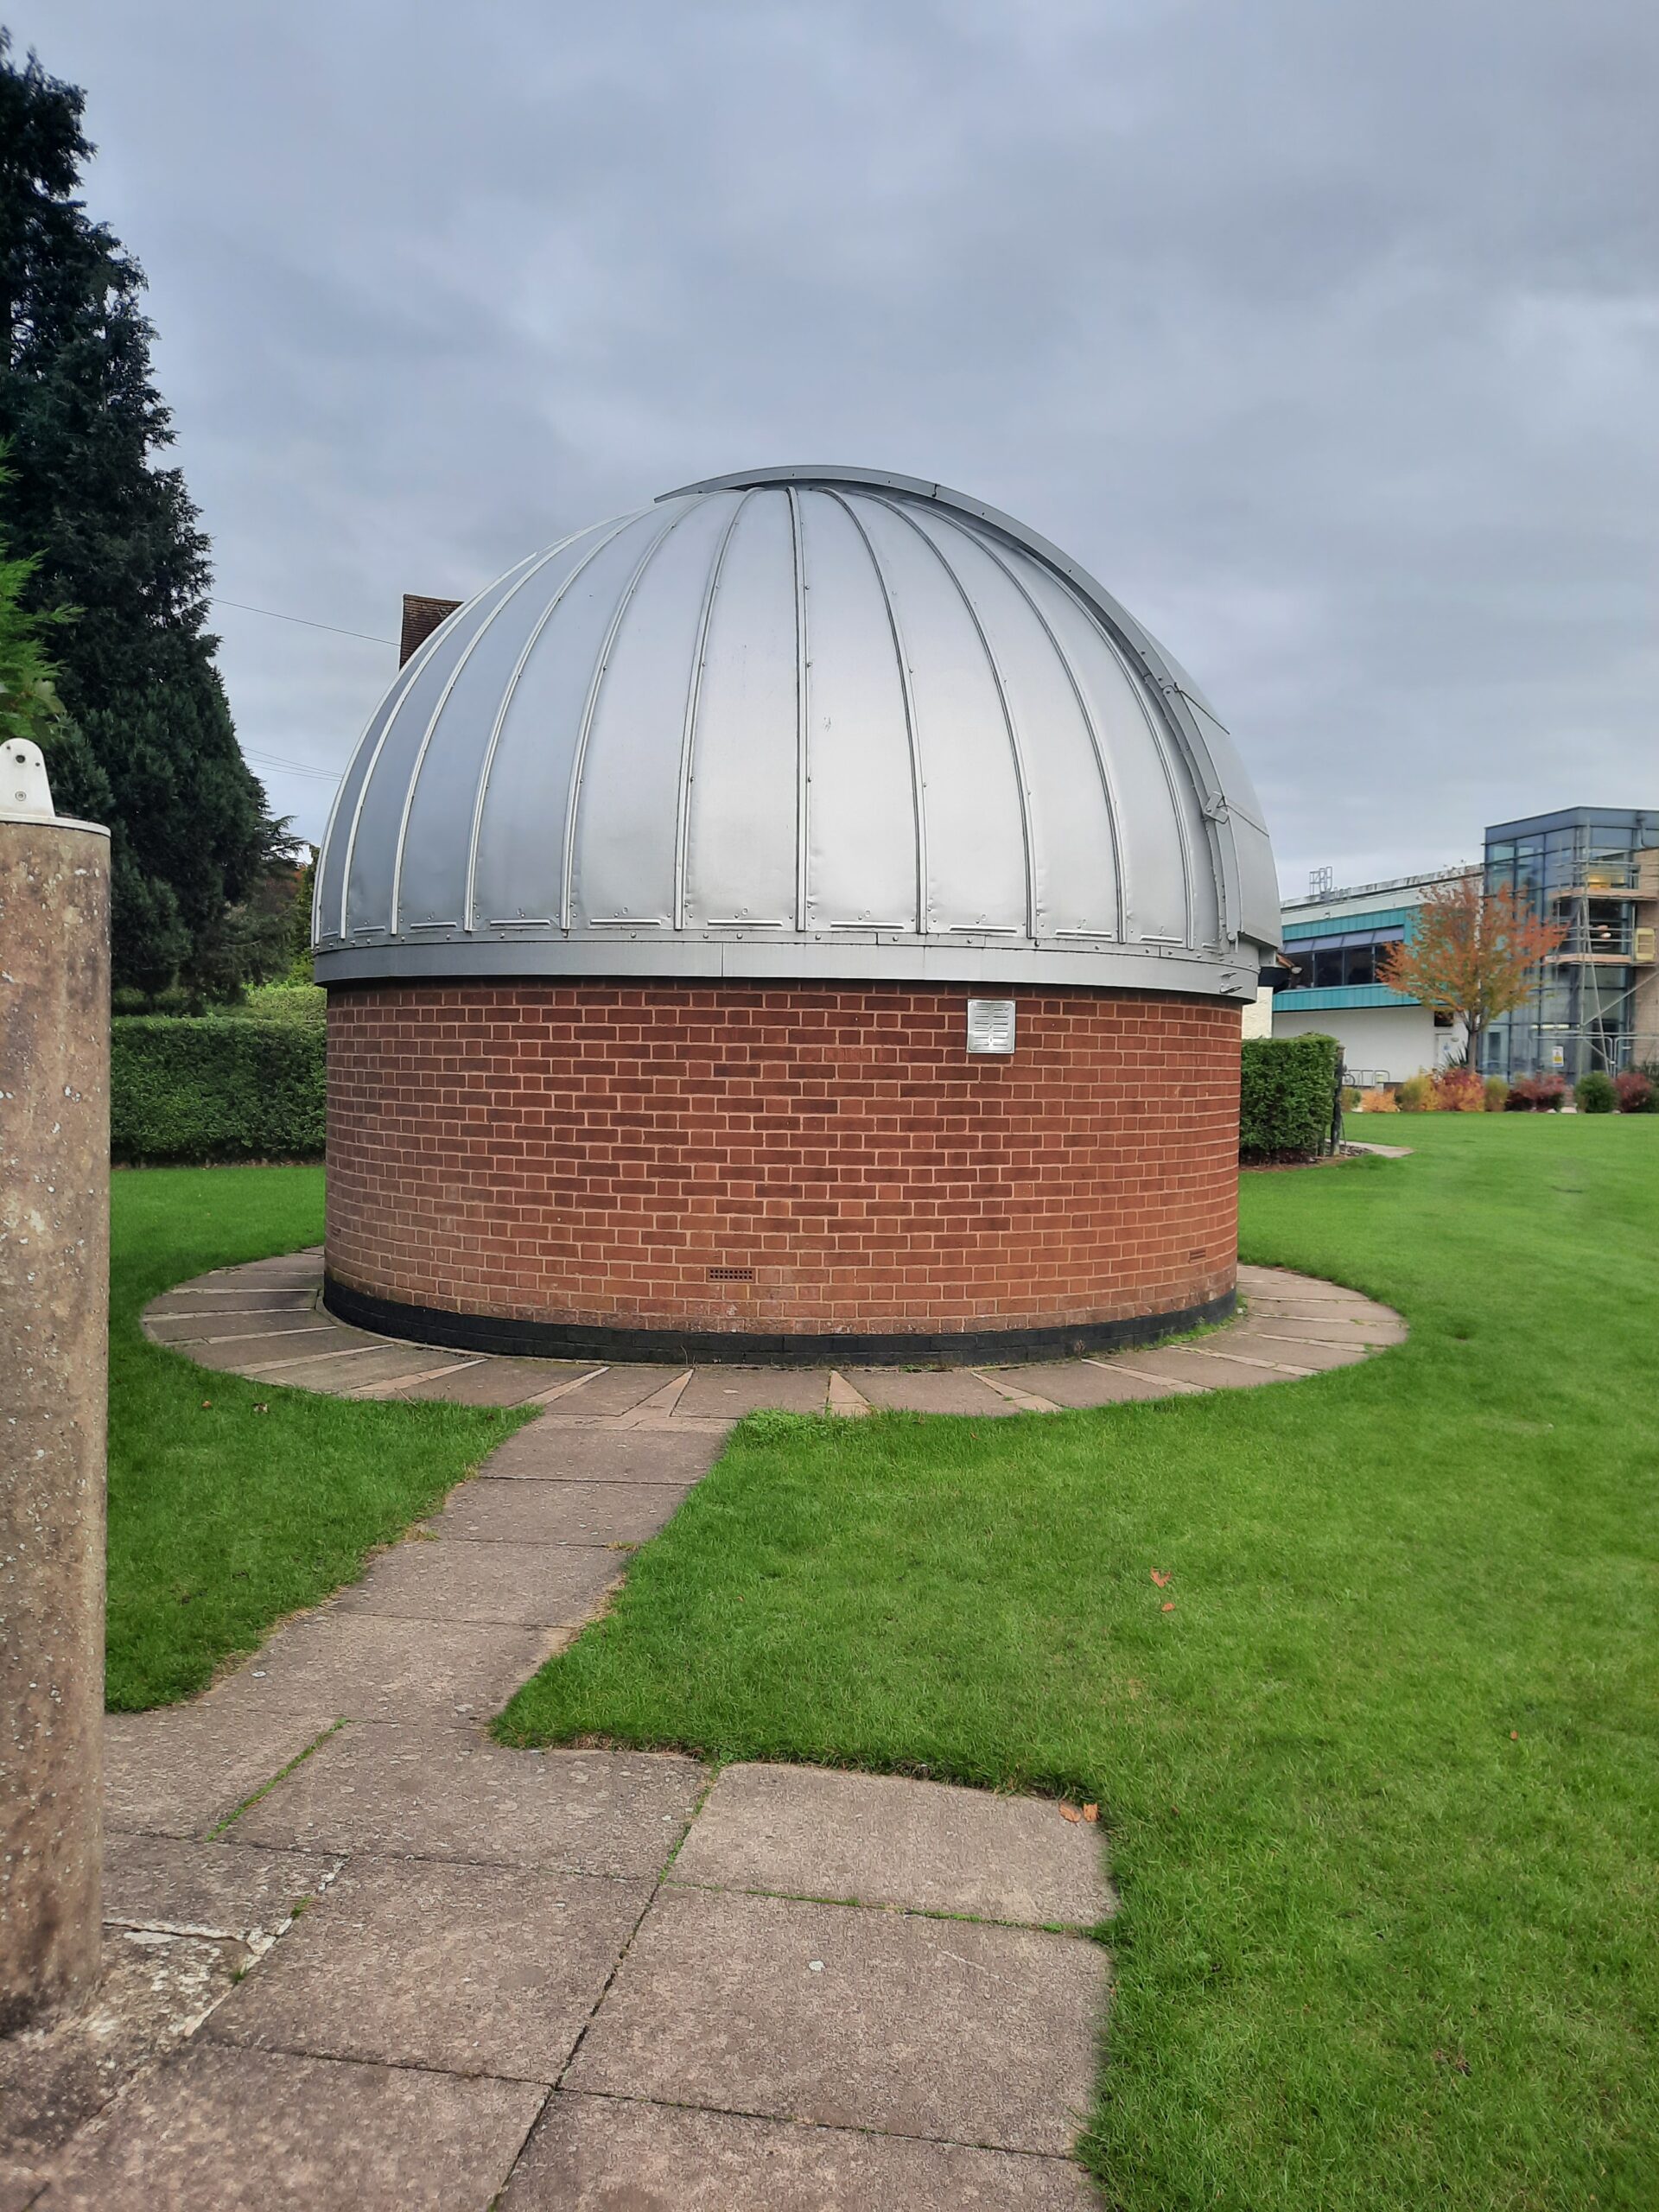 University of Leicester observatory outreach